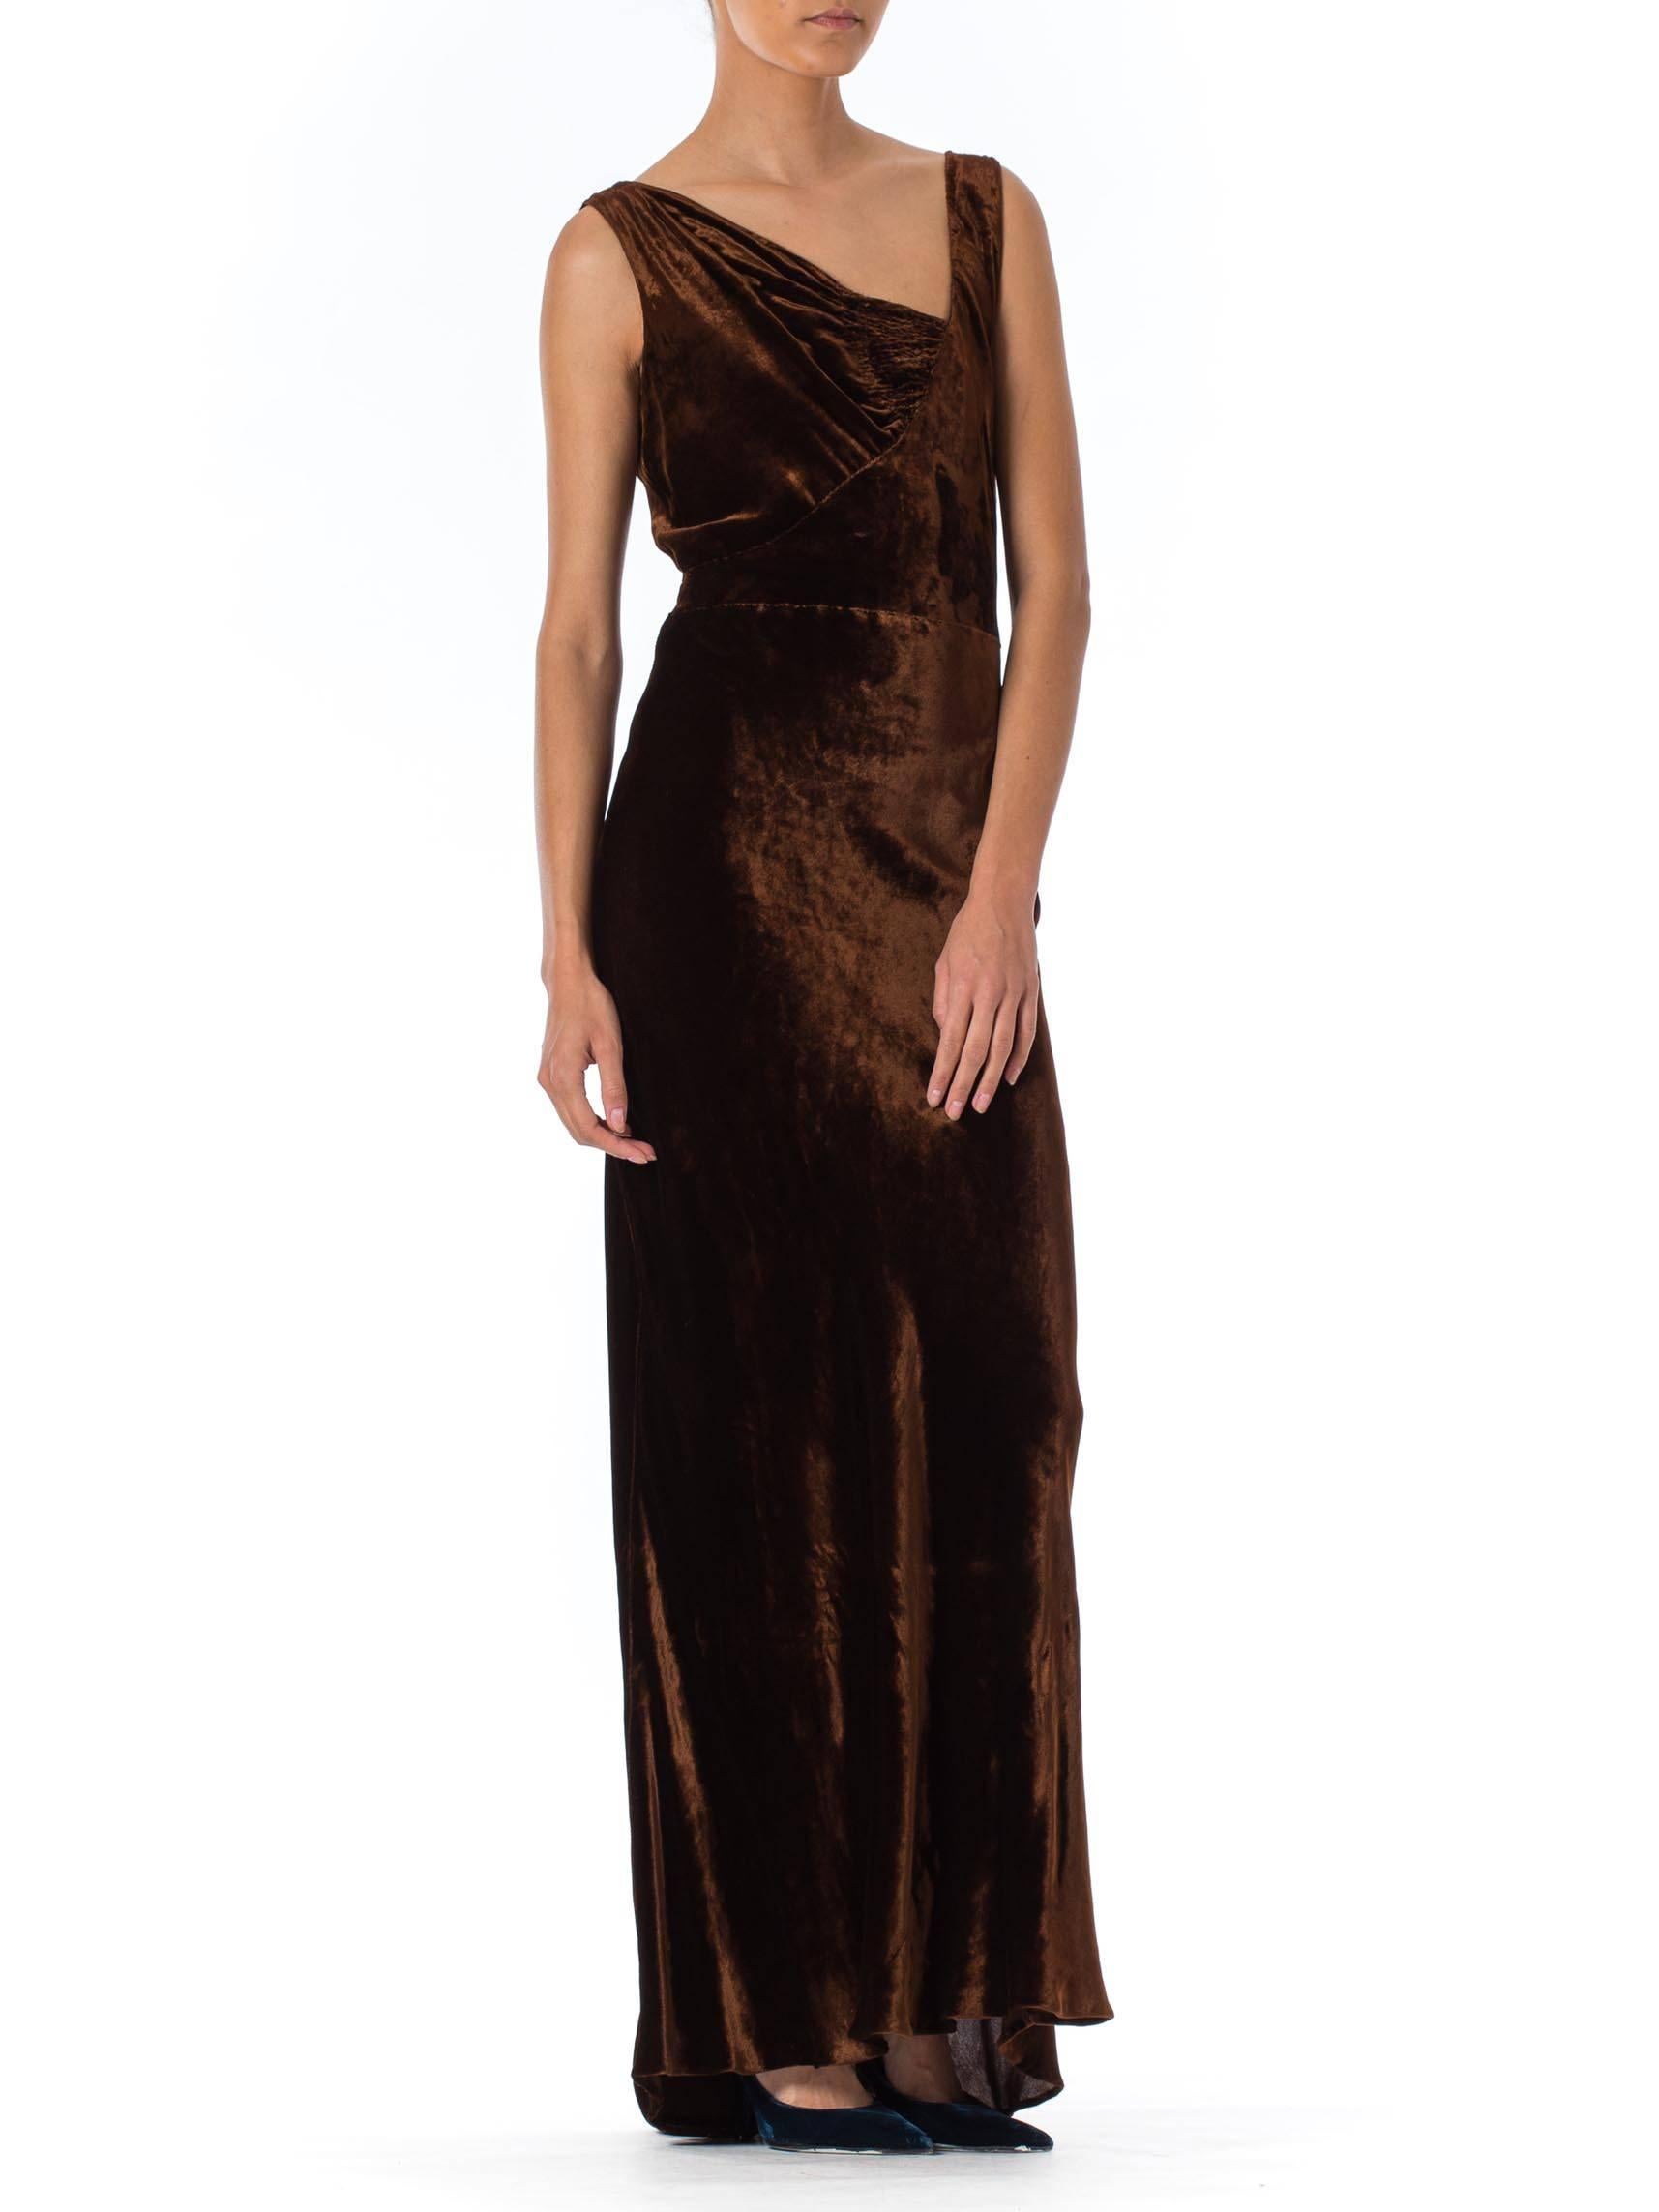 The beautiful bias cut to this gown allows it to go from a double 0 up to a size 4 1930S HARRODS Chocolate Brown Asymmetrically Draped Bias Silk Velvet Gown